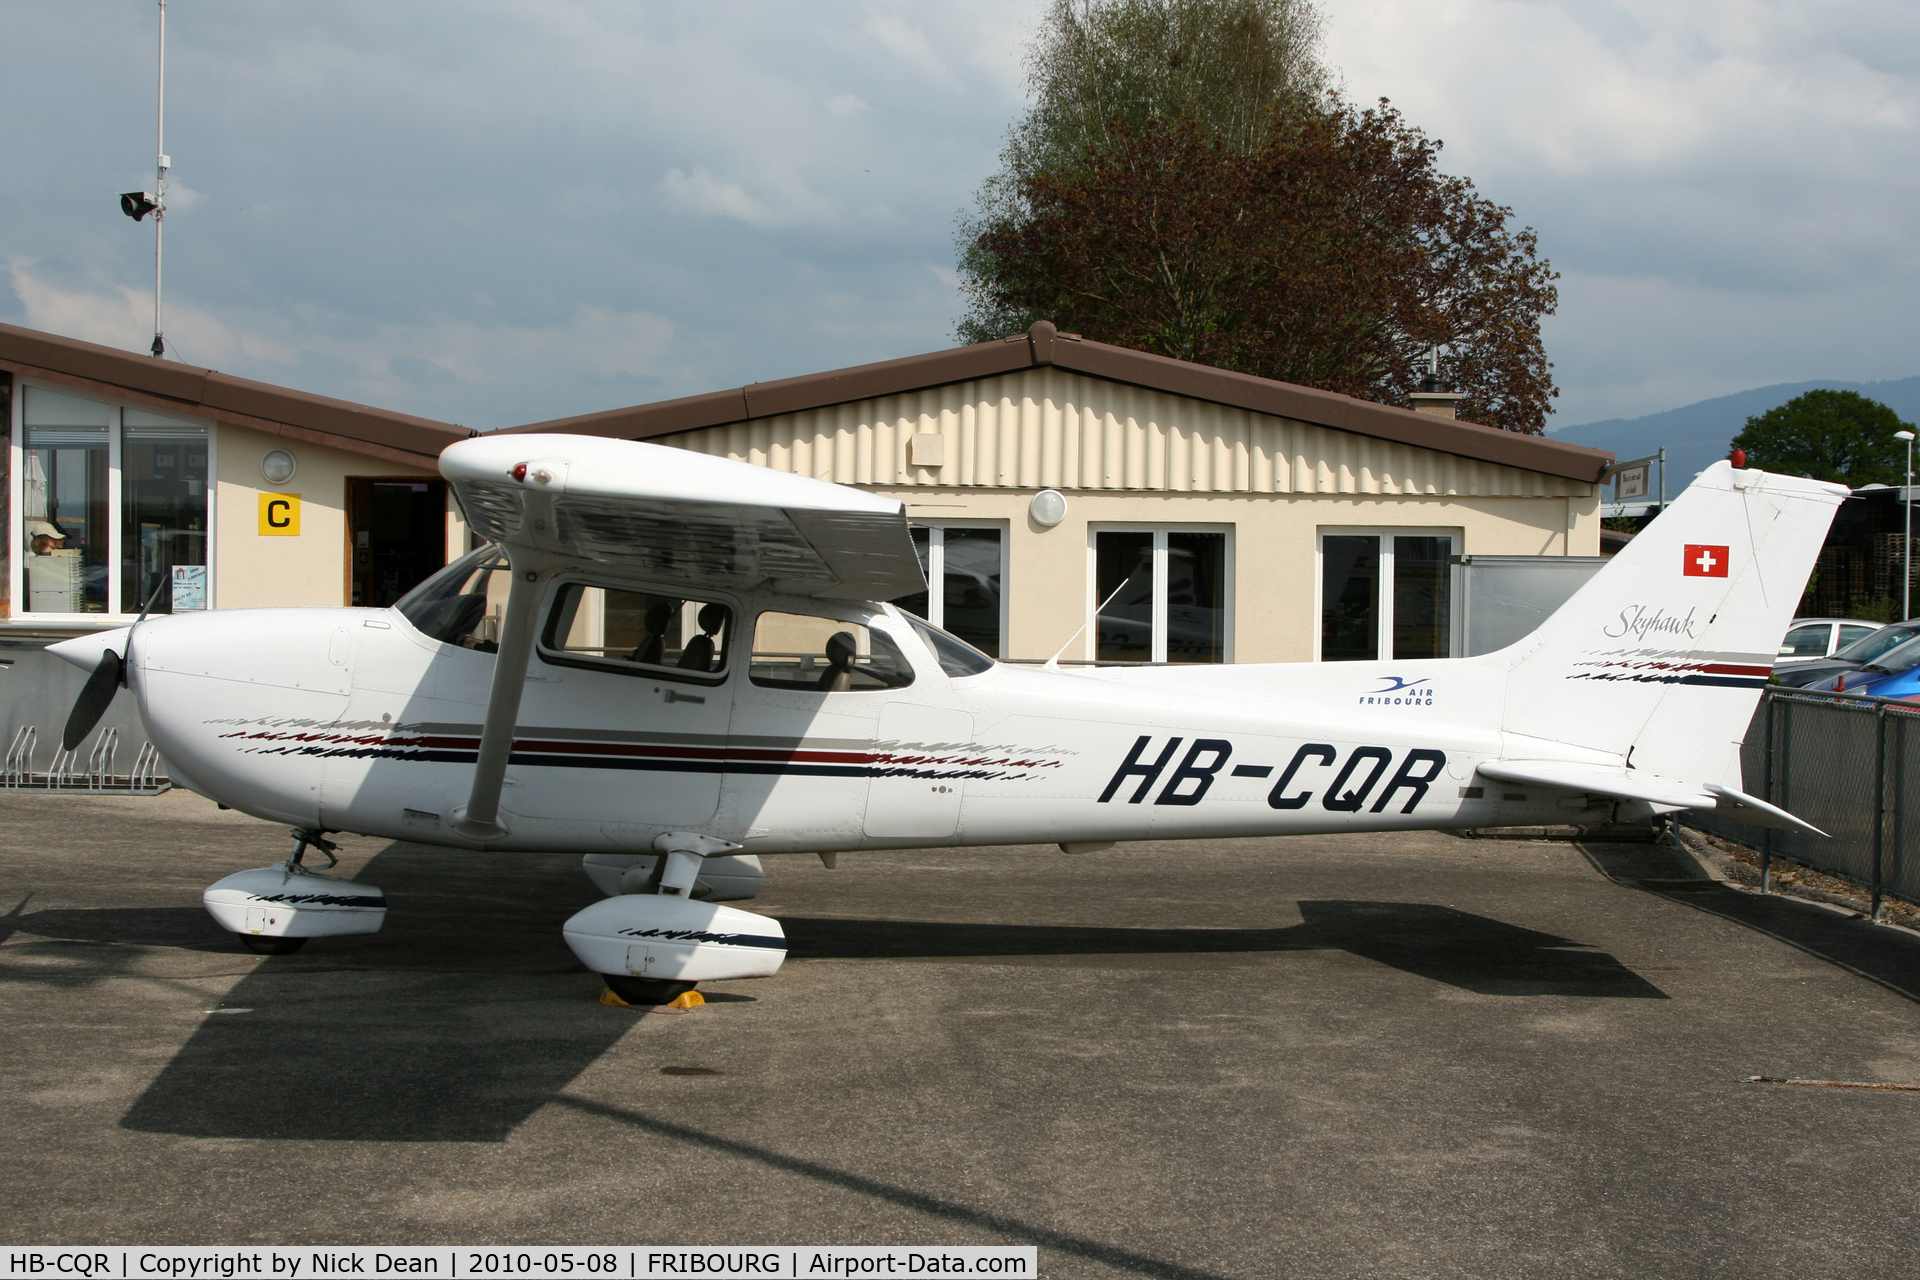 HB-CQR, 1998 Cessna 172R C/N 17280506, Fribourg Airport